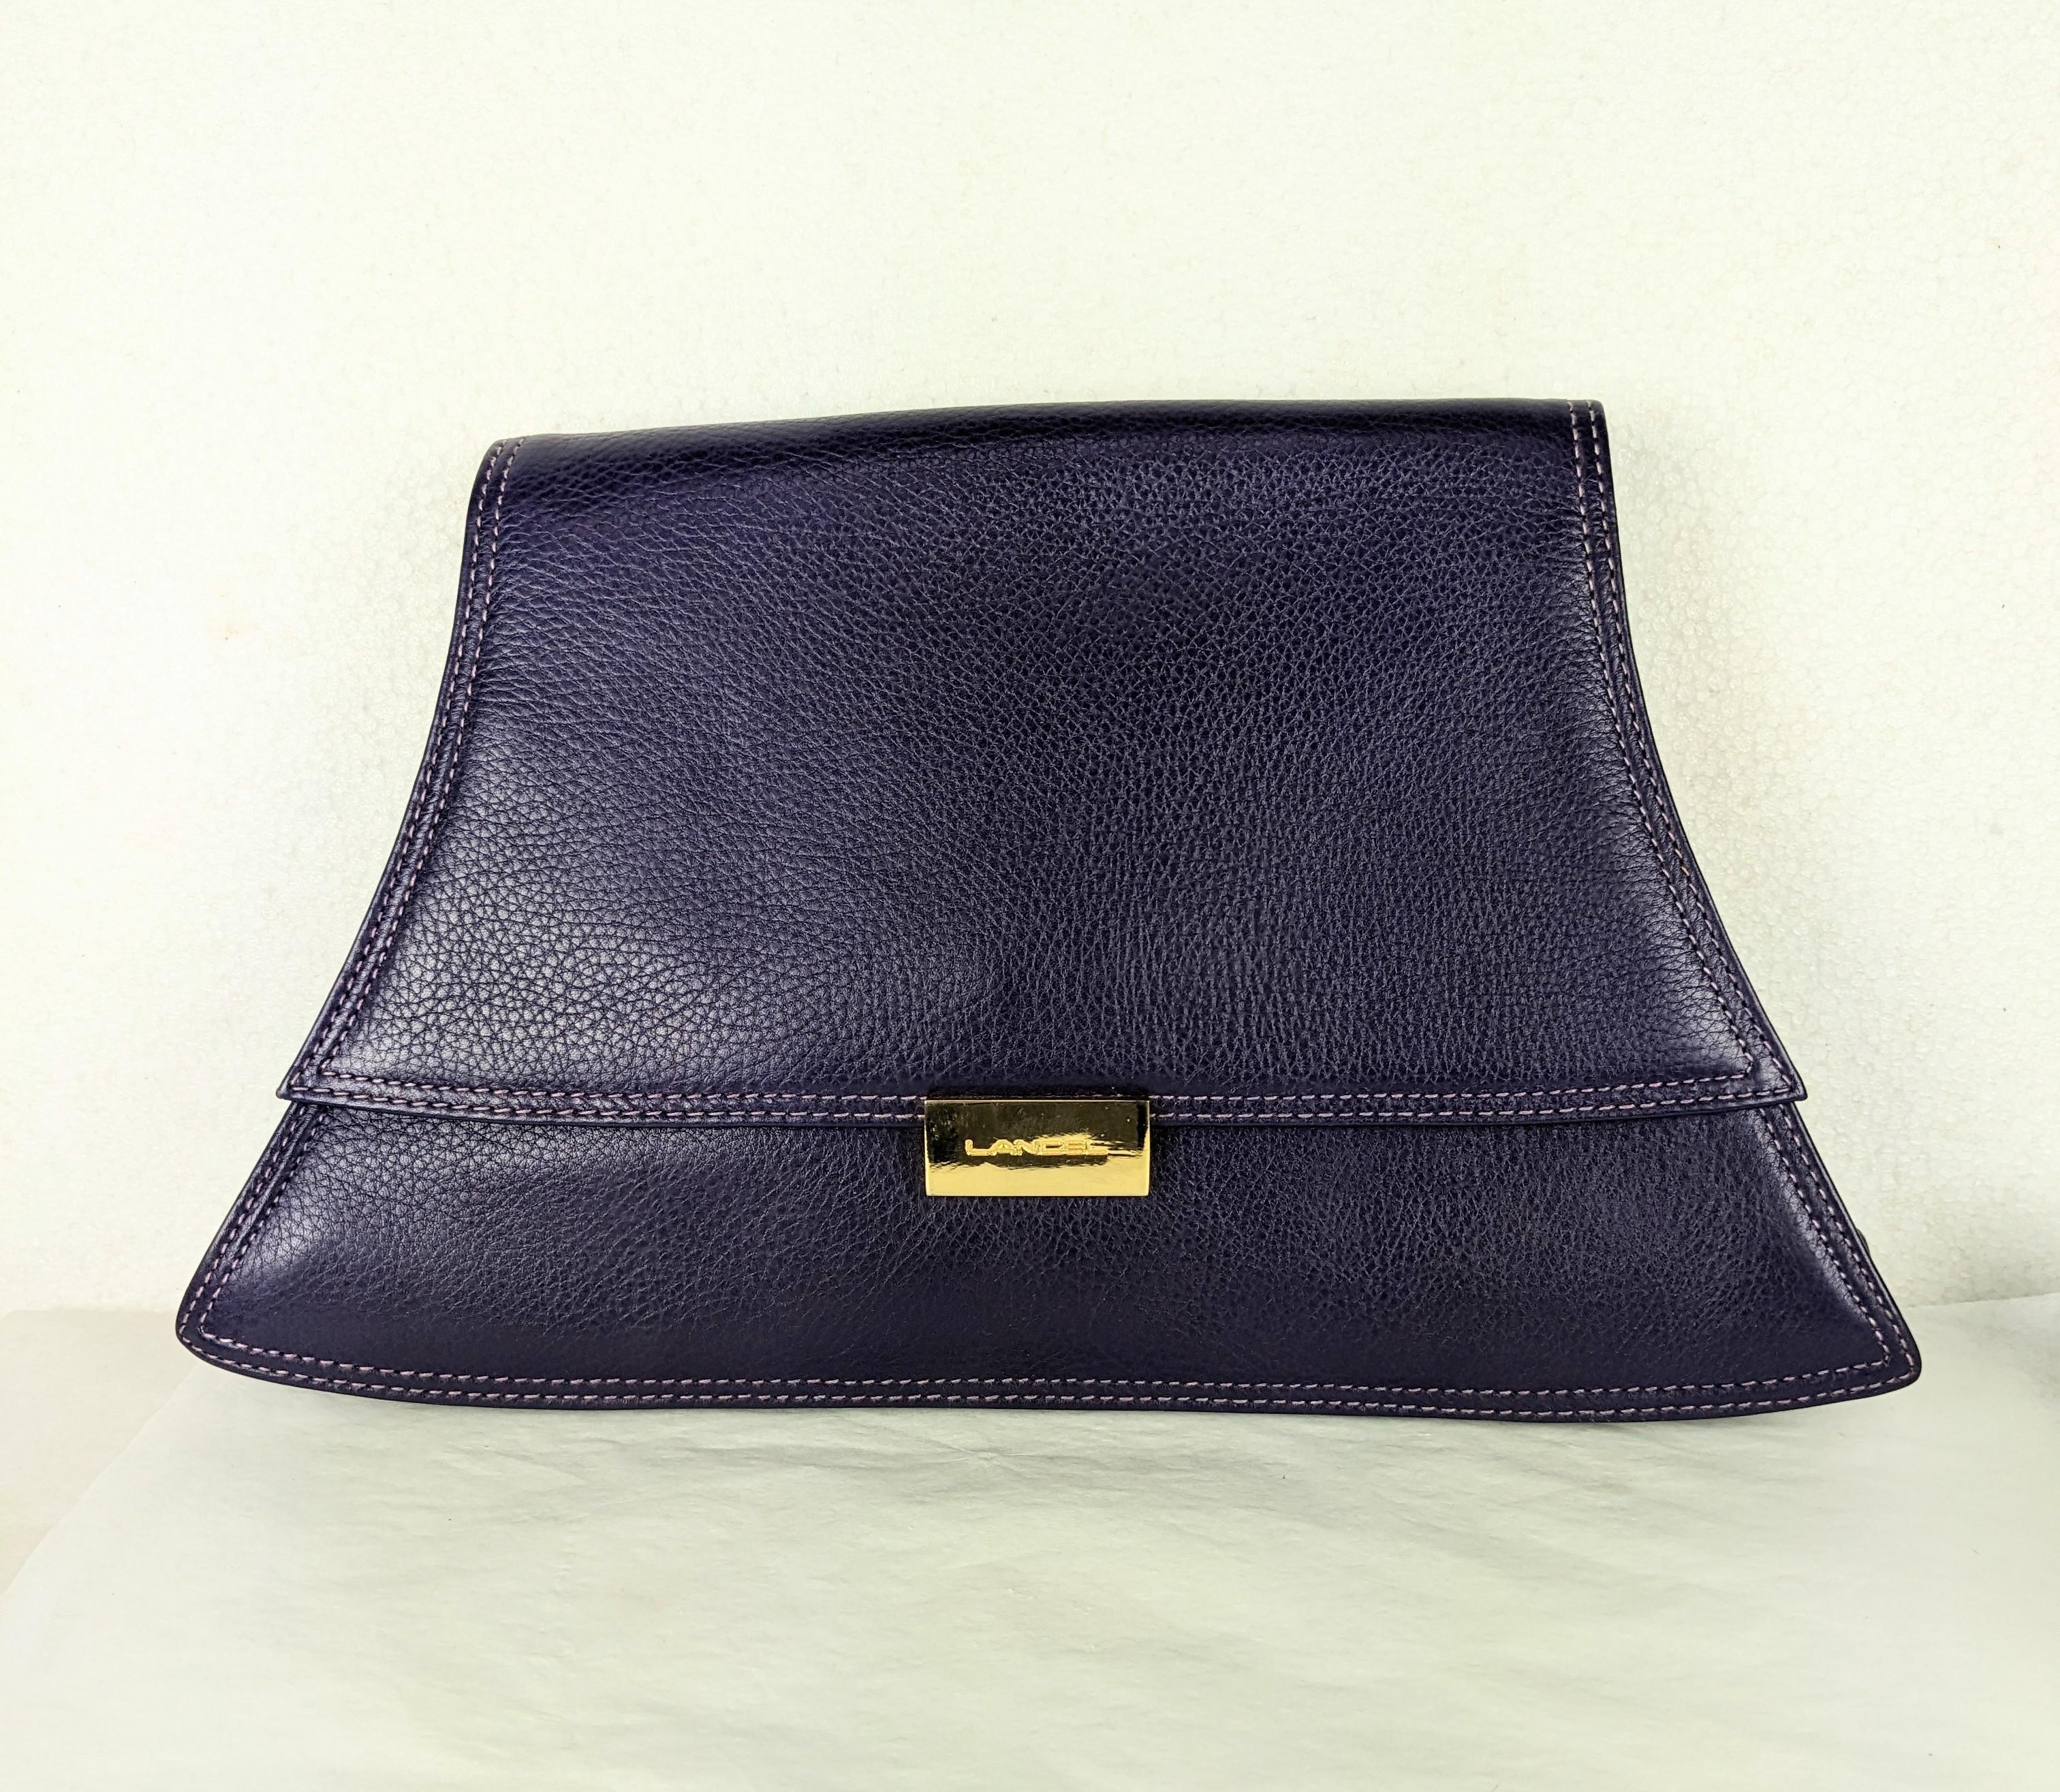 Lancel, Paris Purple Grained Leather Clutch in unusual shape from the early 2000's. Back outside slip pocket, magnetic closure, black leather lining with gold logo clasp. 
Top edge 8.5